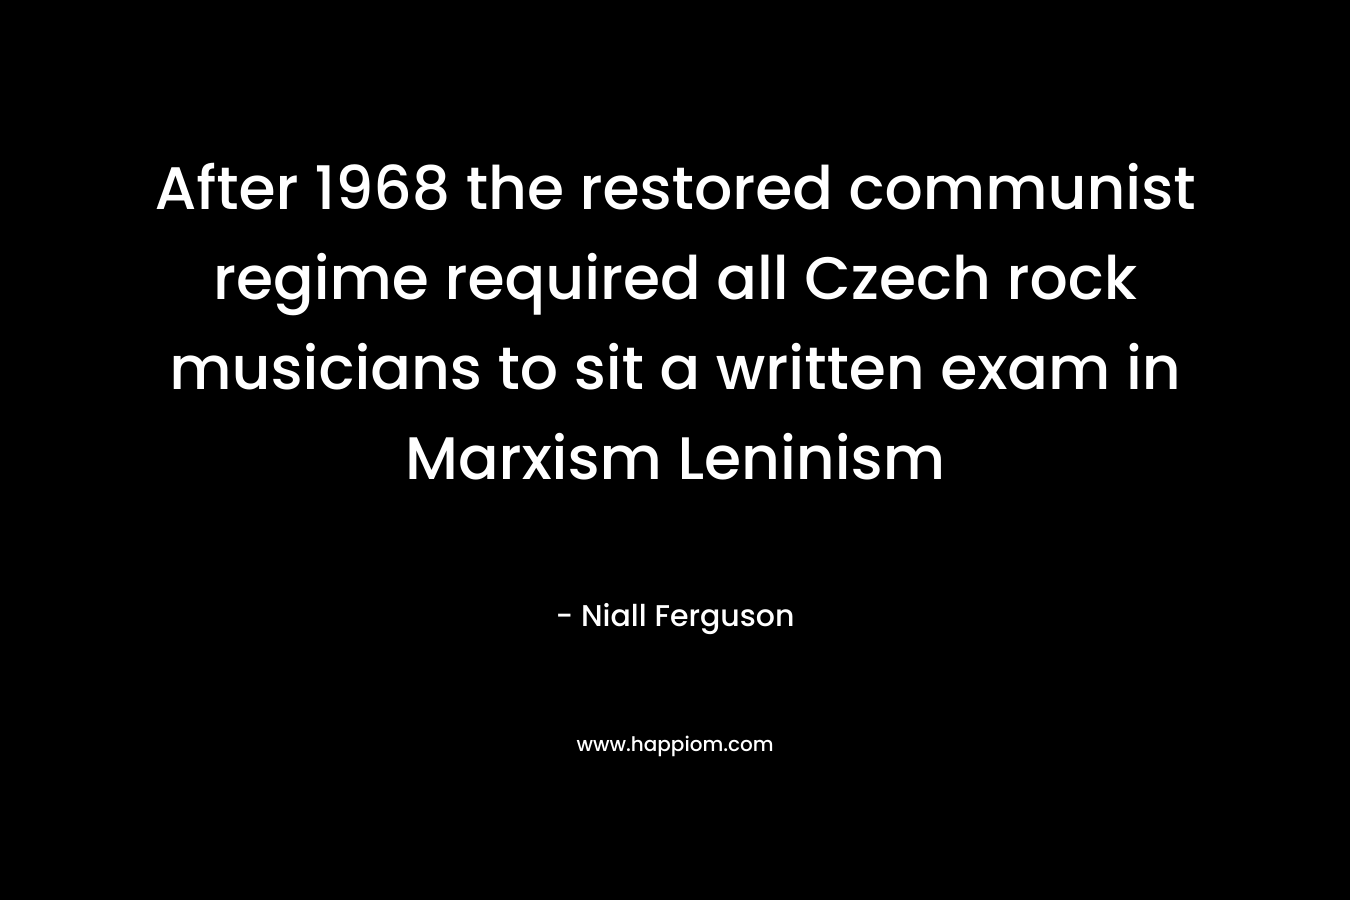 After 1968 the restored communist regime required all Czech rock musicians to sit a written exam in Marxism Leninism